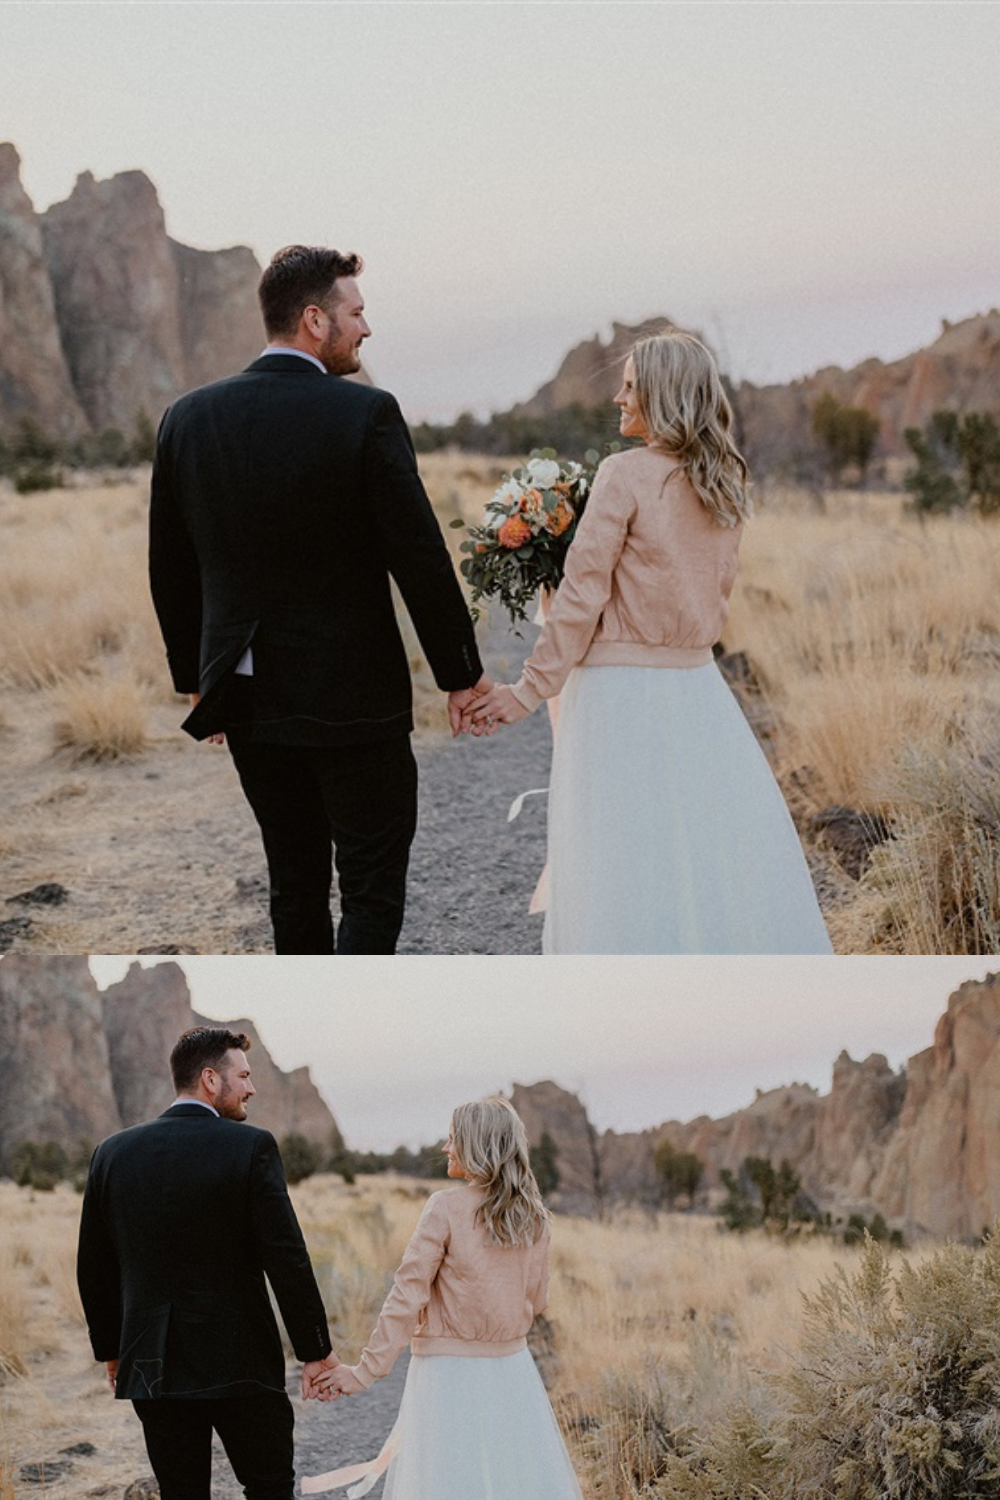 Post-ceremony Smith Rock elopement inspiration of Bride and Groom walking into the sunset holding hands | Sun River Elopement, Destination Elopement Photographer, Smith Rock Elopement Inspiration, Oregon Elopement ideas, PNW Fall Wedding Inspiration, Fall Outdoor Wedding Ideas,Fall Wedding Inspiration, PNW Outdoor Wedding Ideas | chelseaabril.com